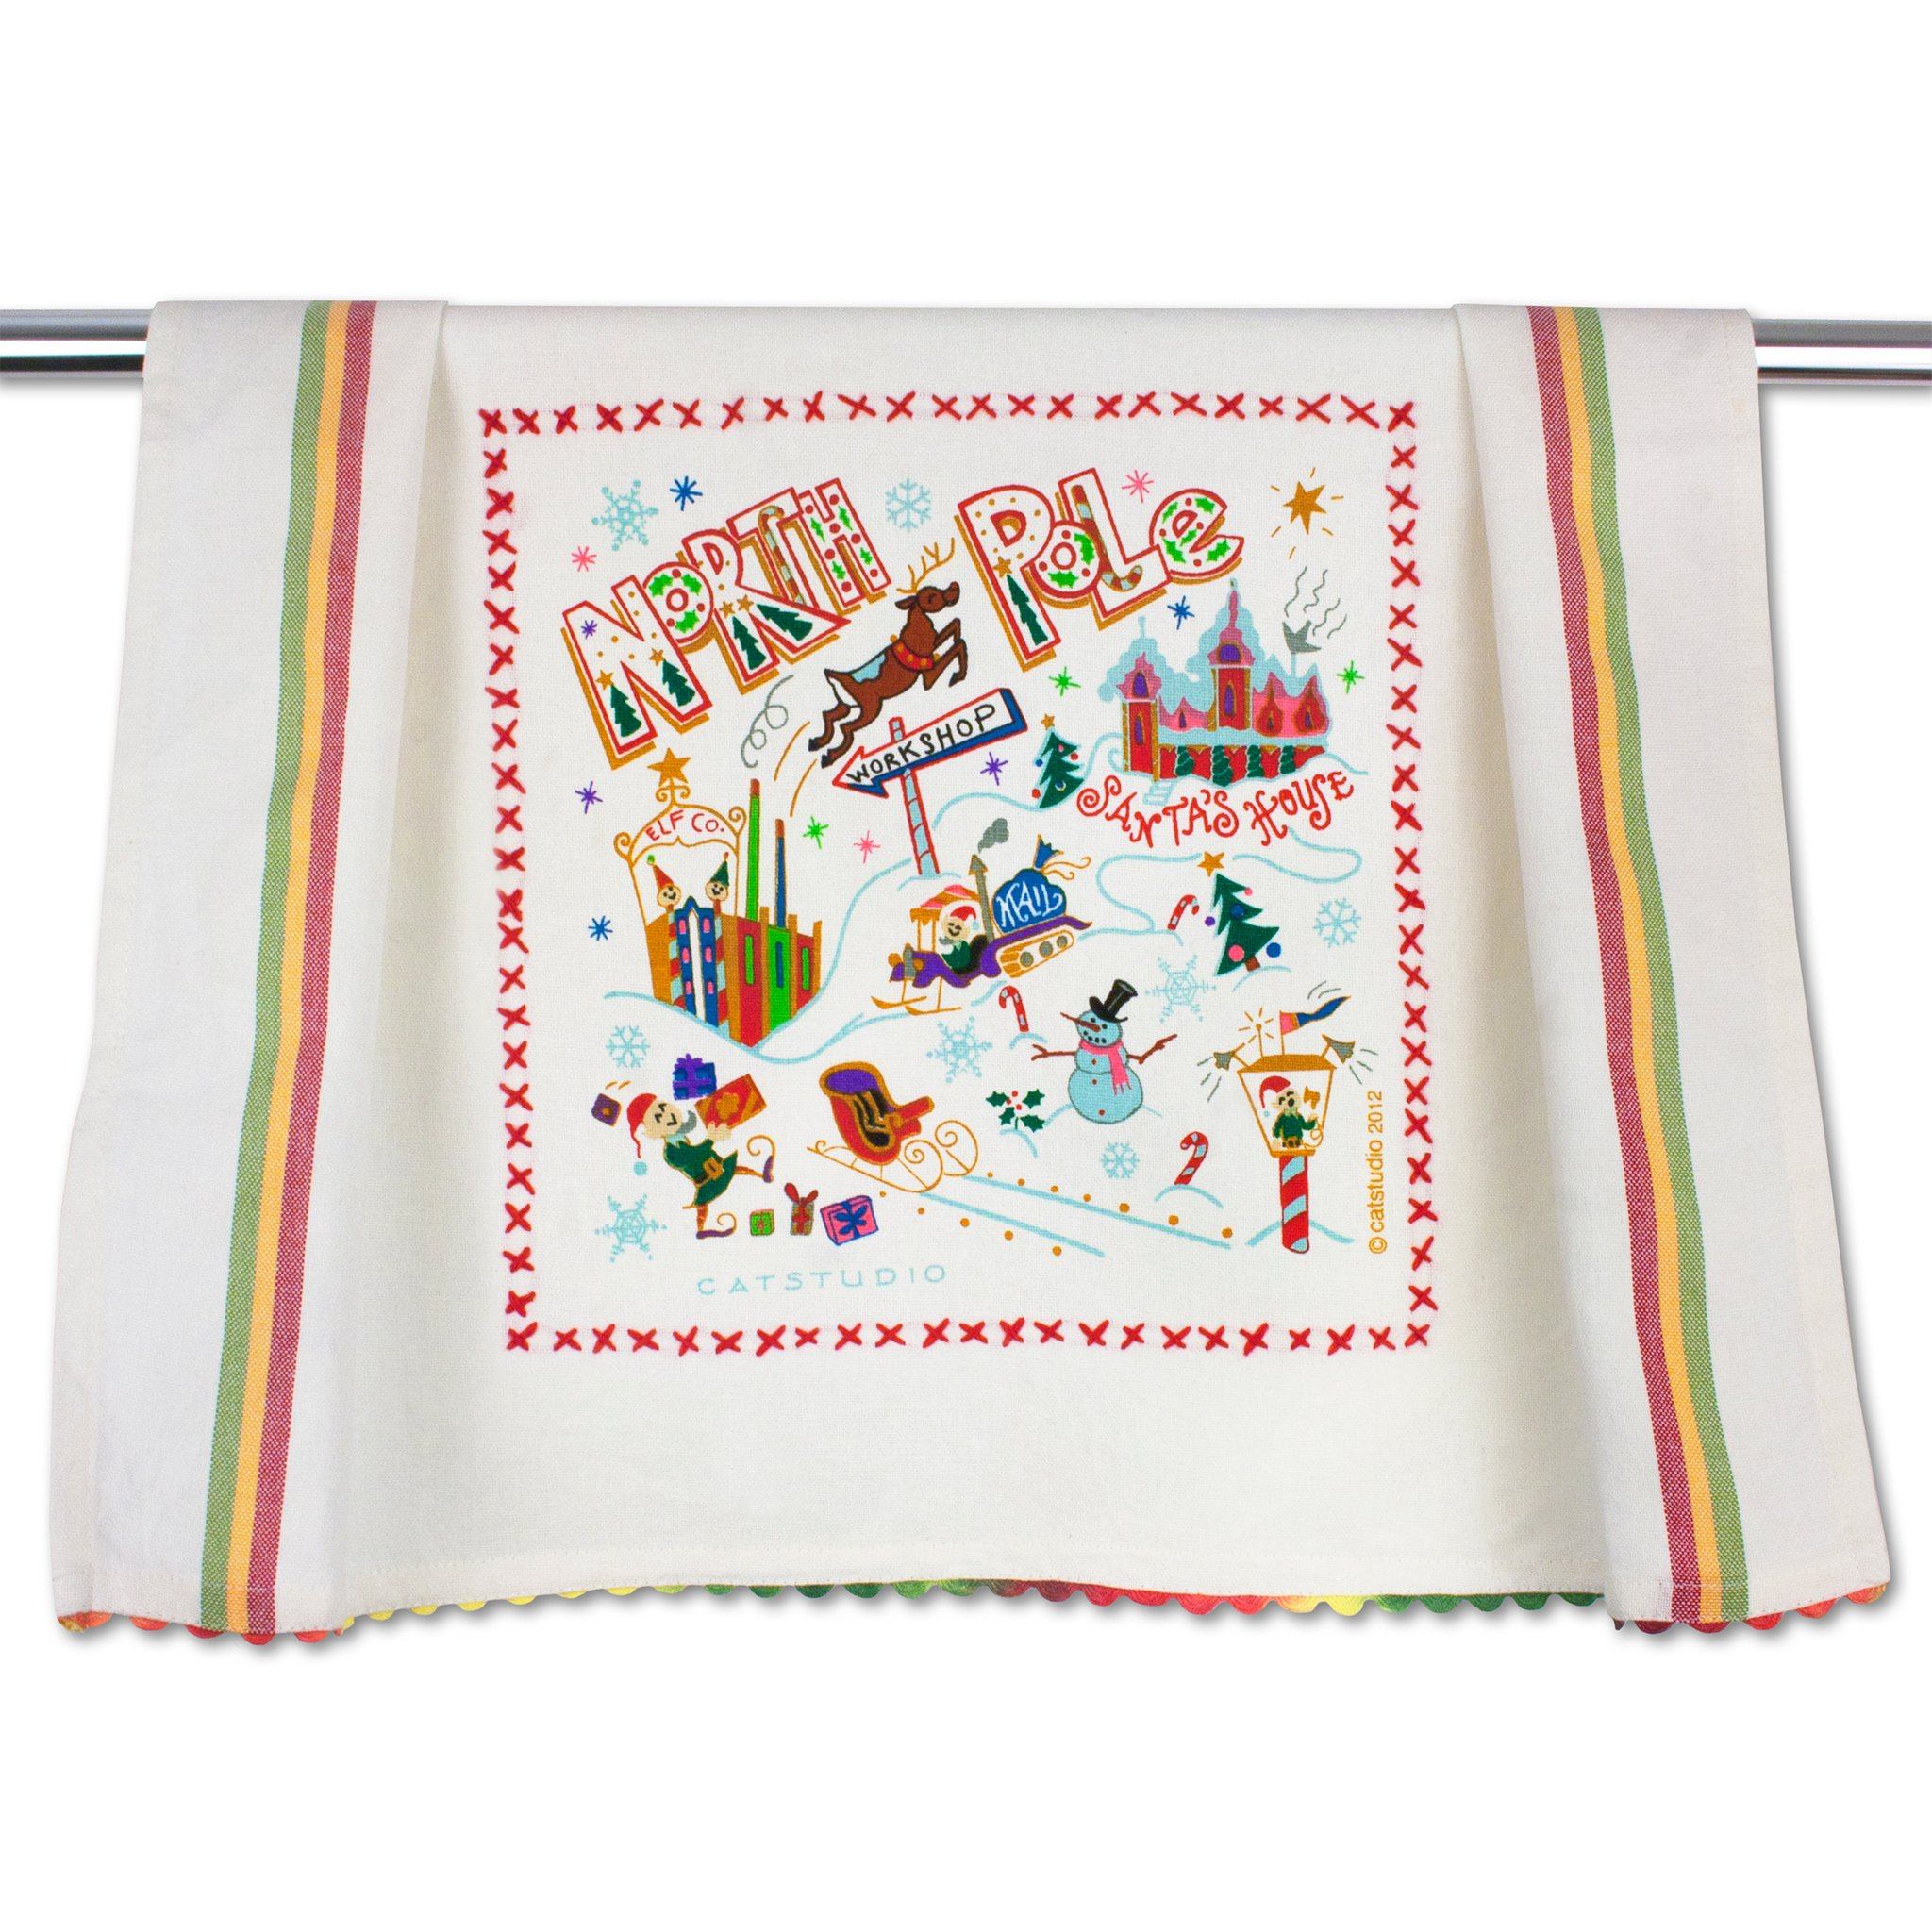 Beautiful handwoven cotton kitchen towels - Whimsy & Tea